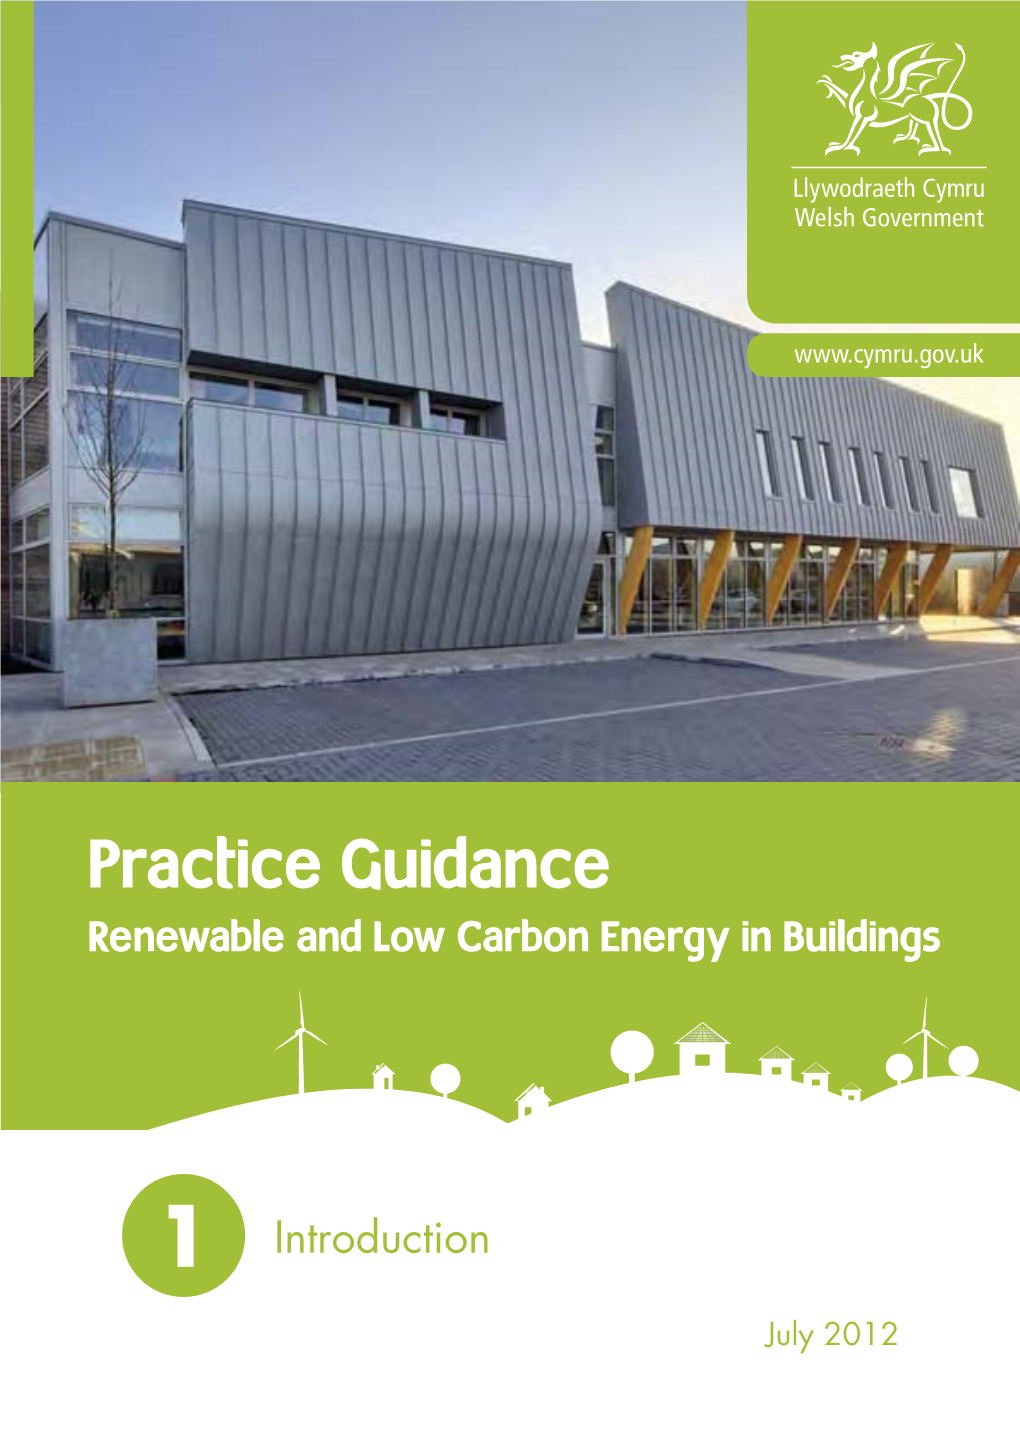 Practice Guidance Renewable and Low Carbon Energy in Buildings